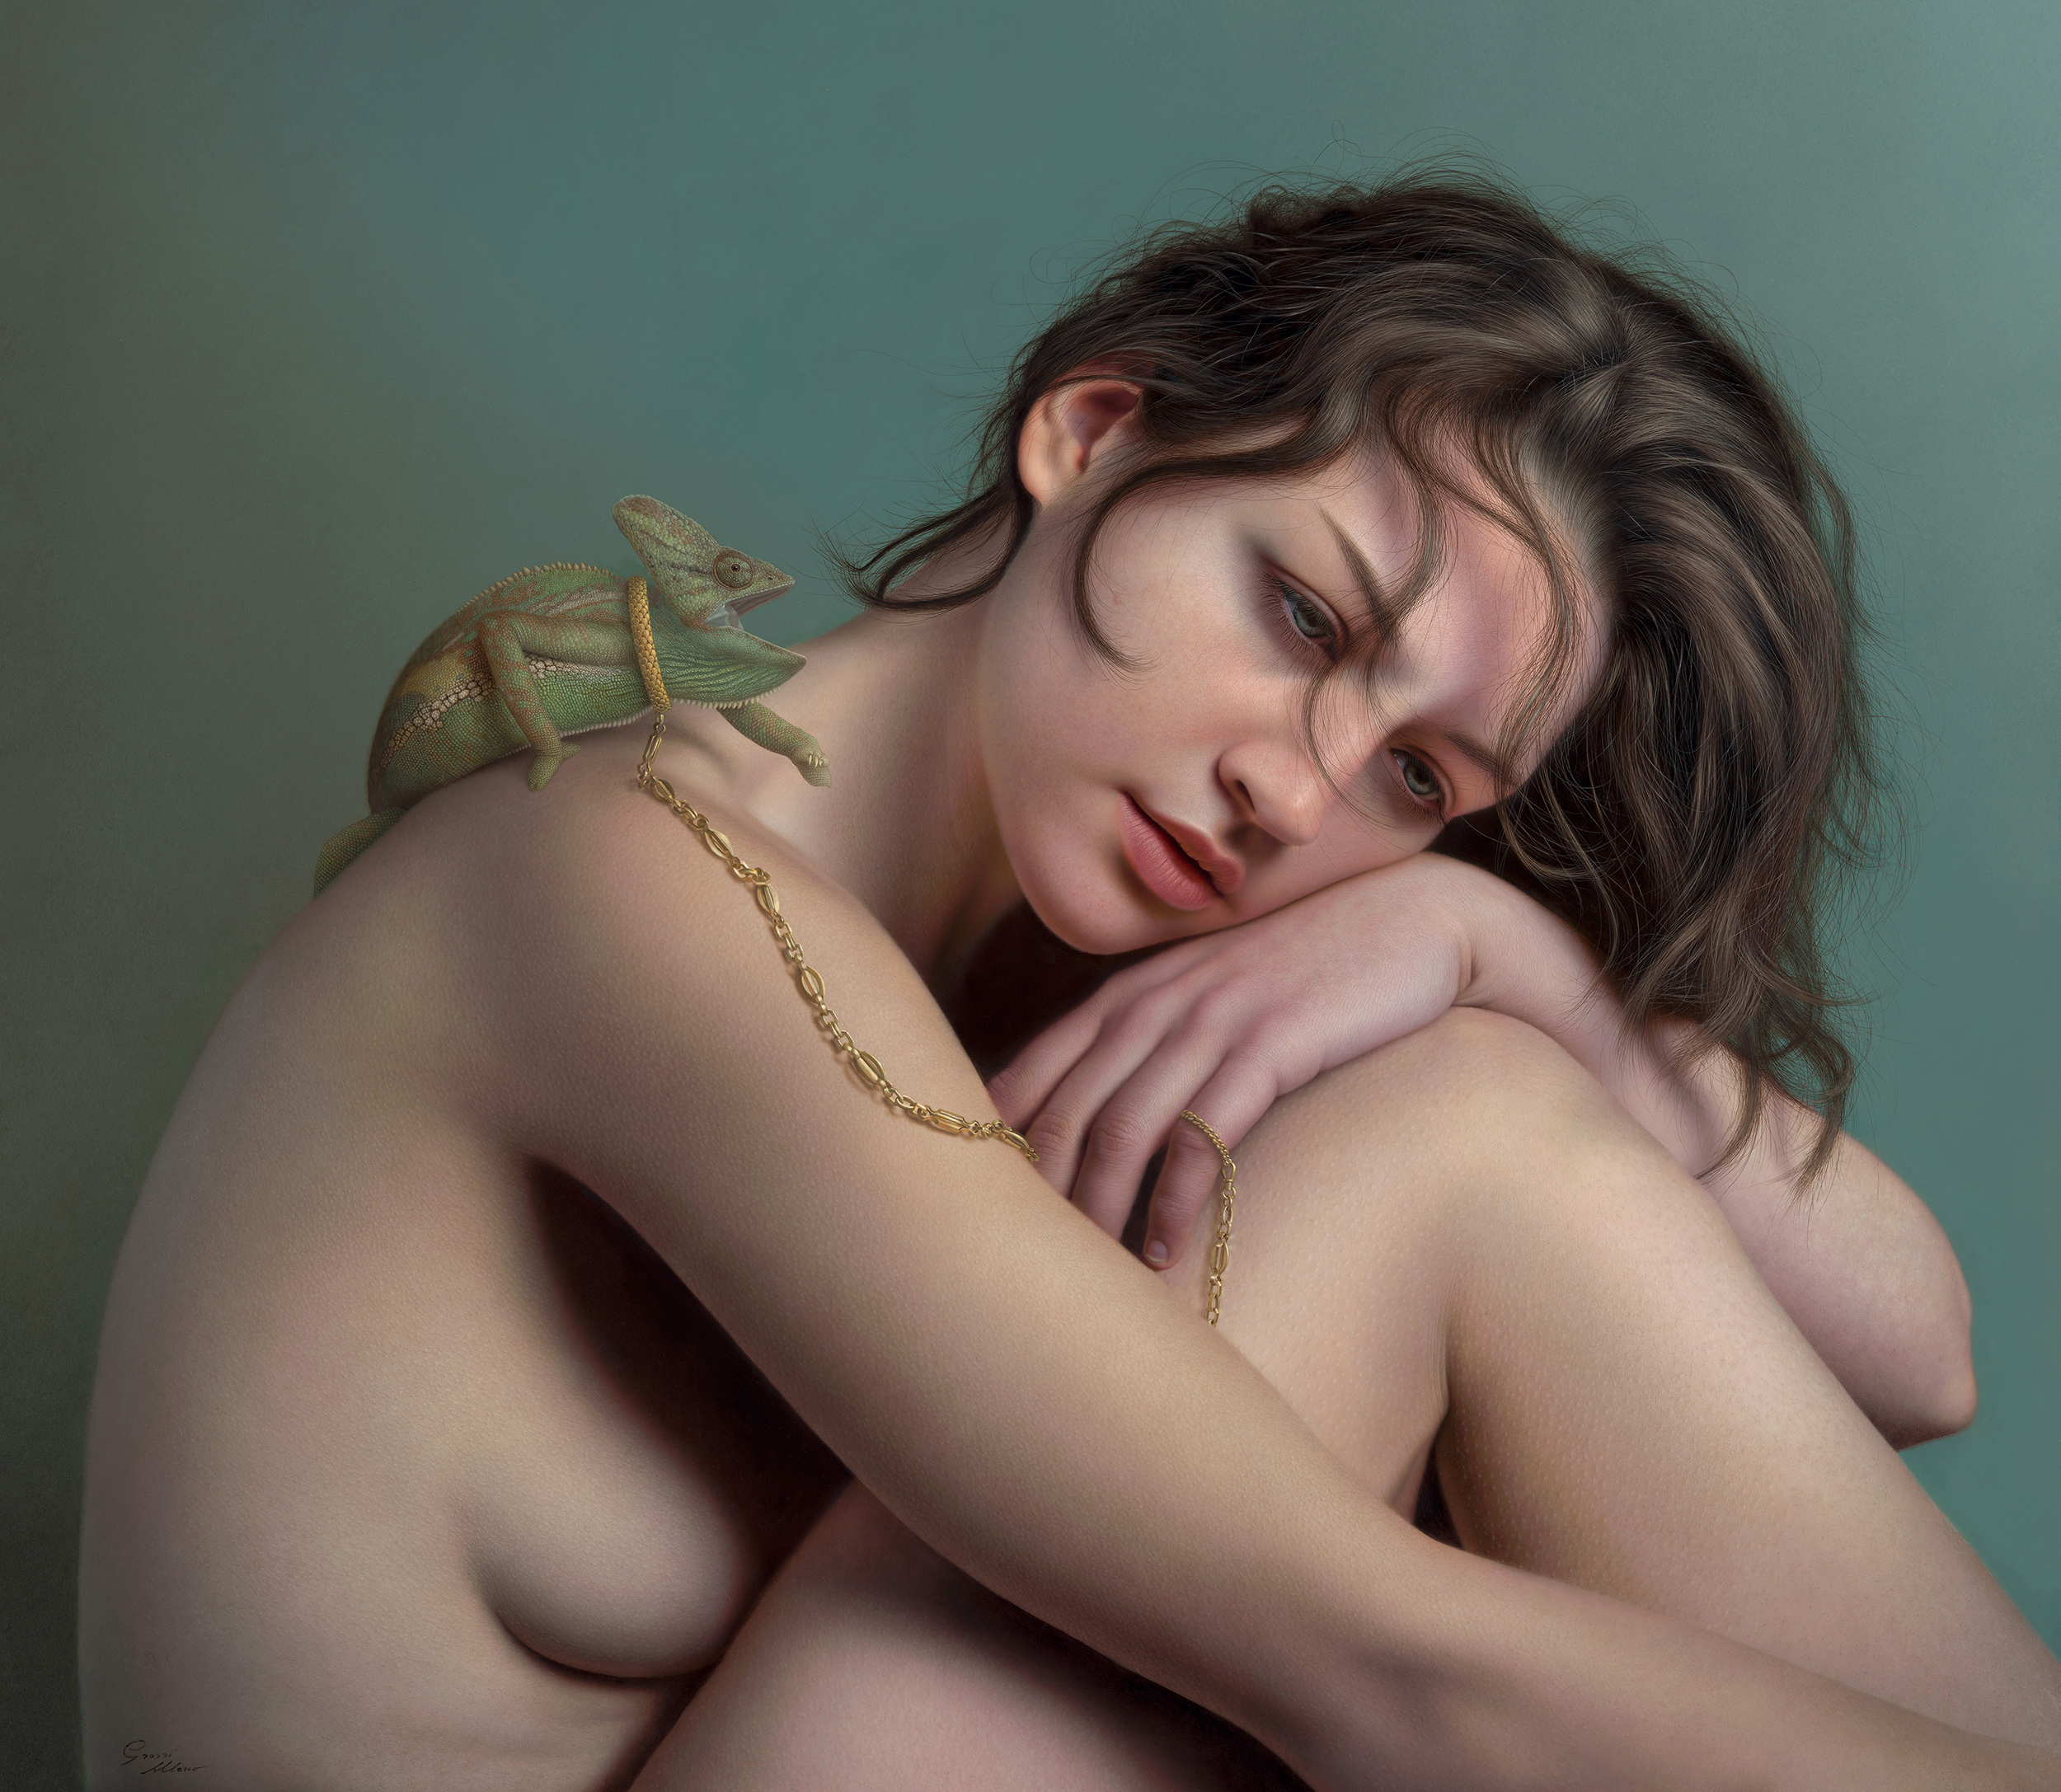 Captivity by Marco Grassi